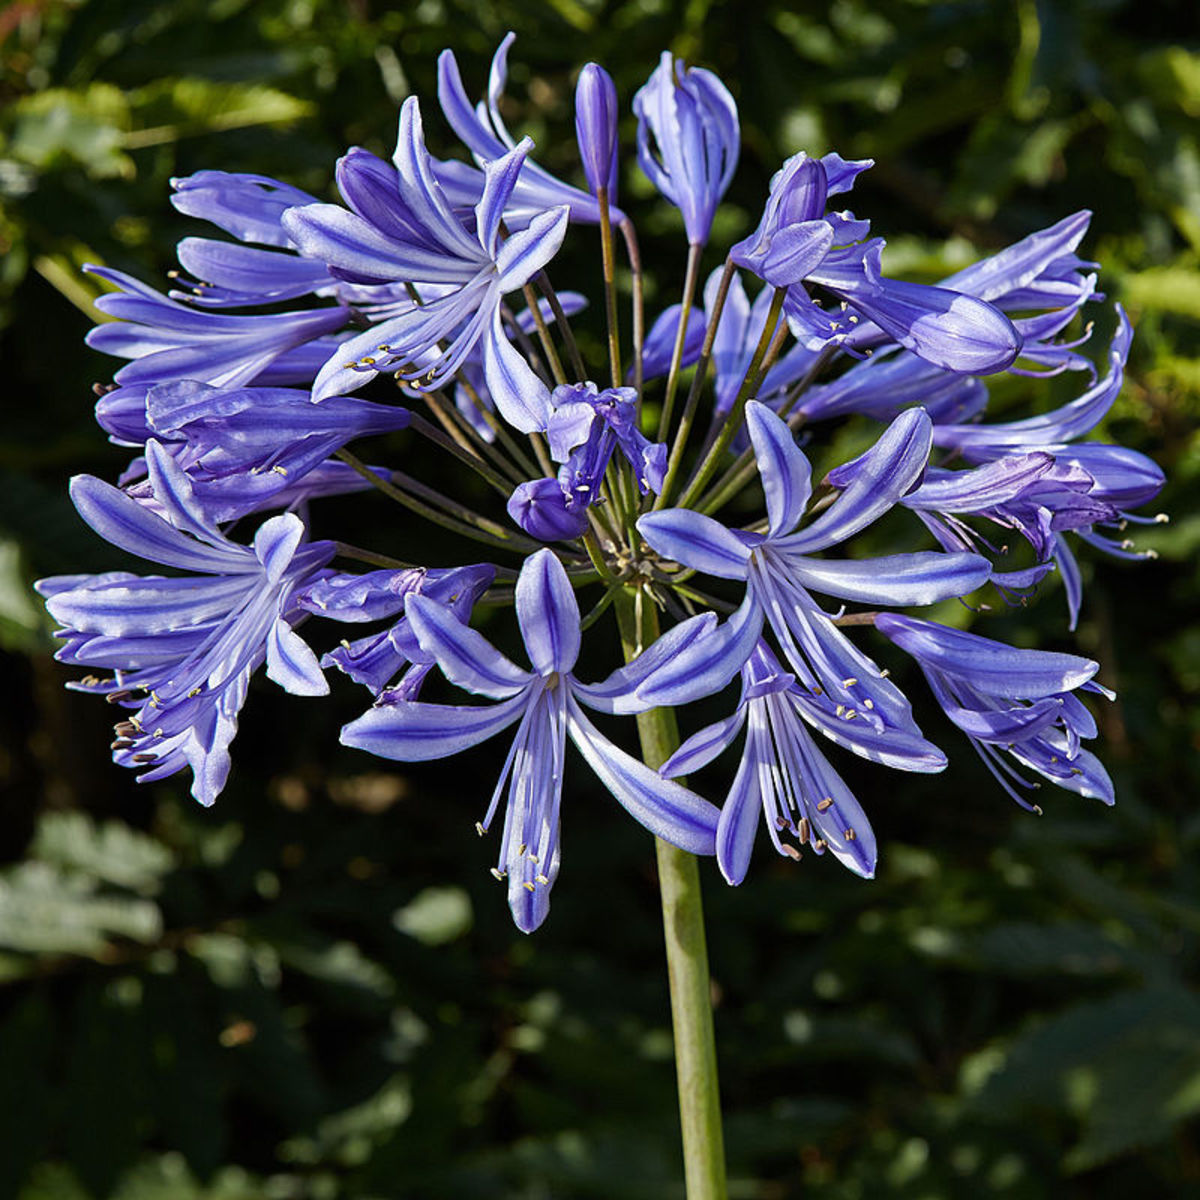 Individual flowers resemble lily flowers.